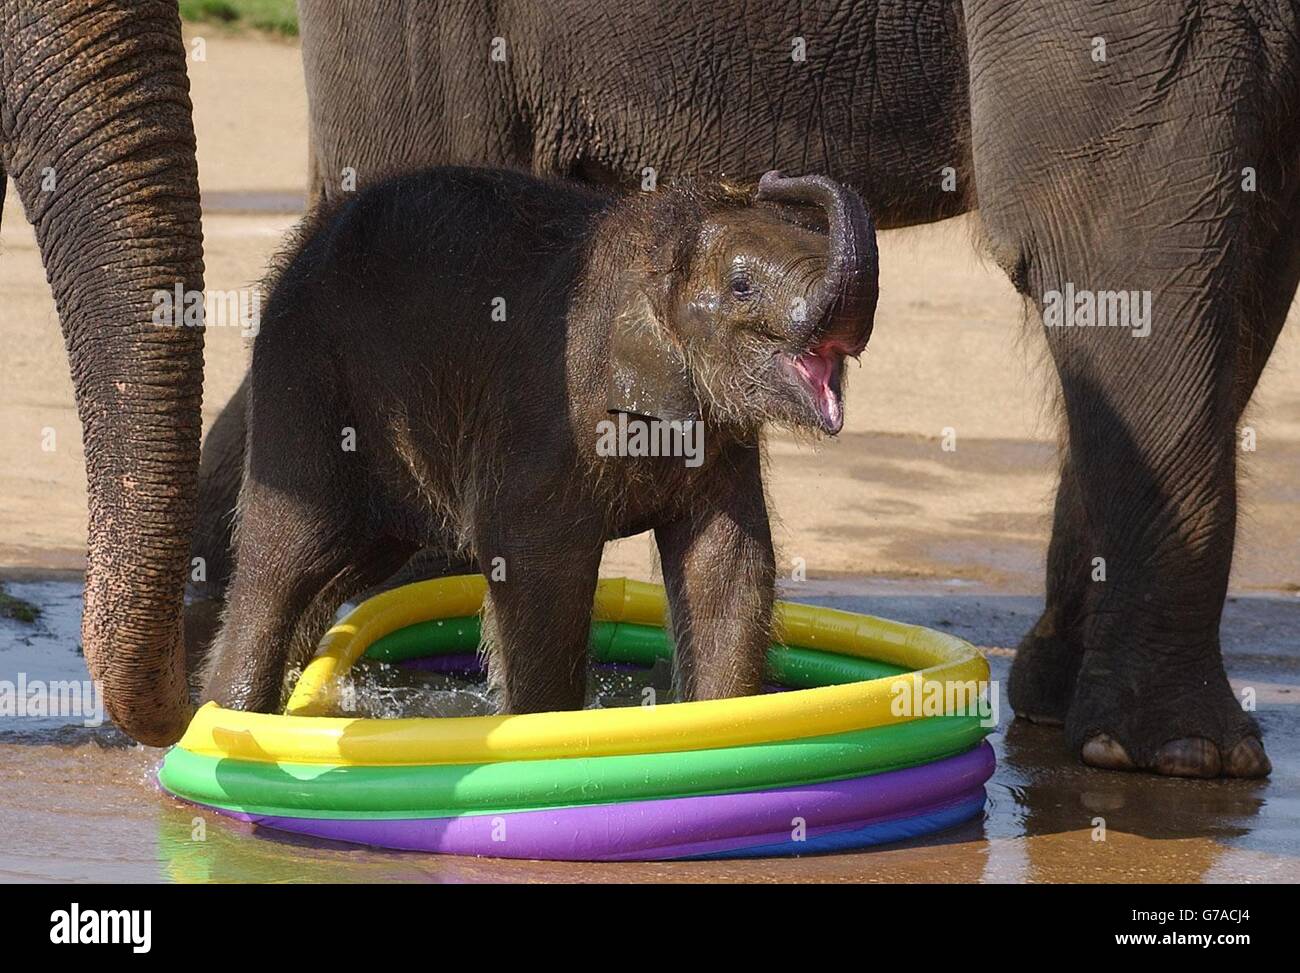 Baby Asian elephant Aneena, born at Whipsnade Wild Animal Park, Dunstable, Bedfordshire in March and already weighing a quarter of a tonne, frolics in a paddling pool of water. It is important for elephants to bath regularly to keep their skin moisturised and supple. The keepers bought her the child's pool as the pool within her enclosure is too large for her to enjoy. Stock Photo